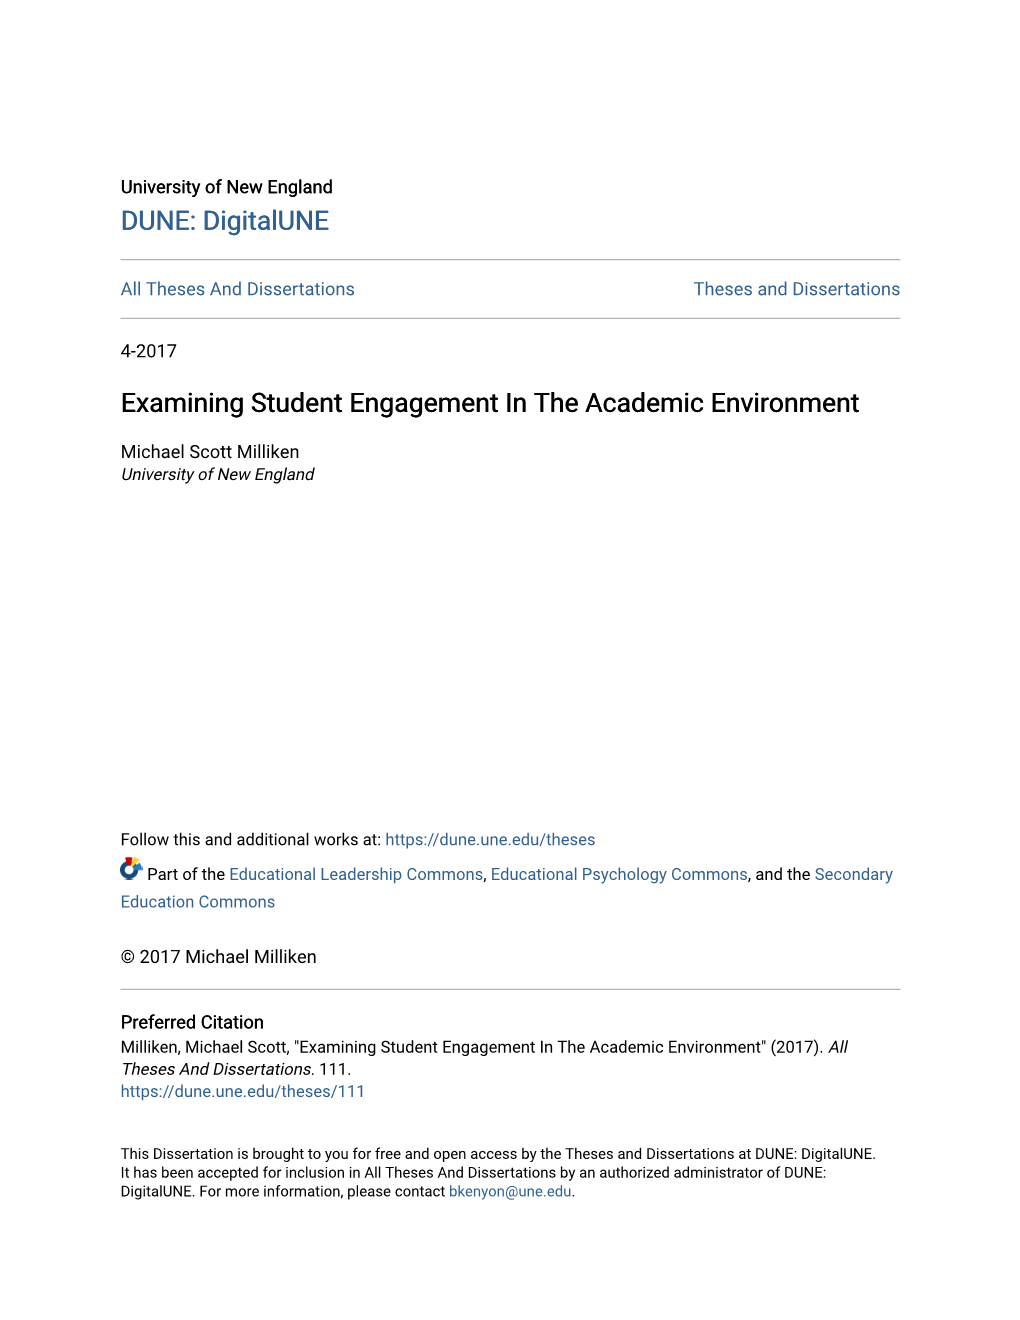 Examining Student Engagement in the Academic Environment